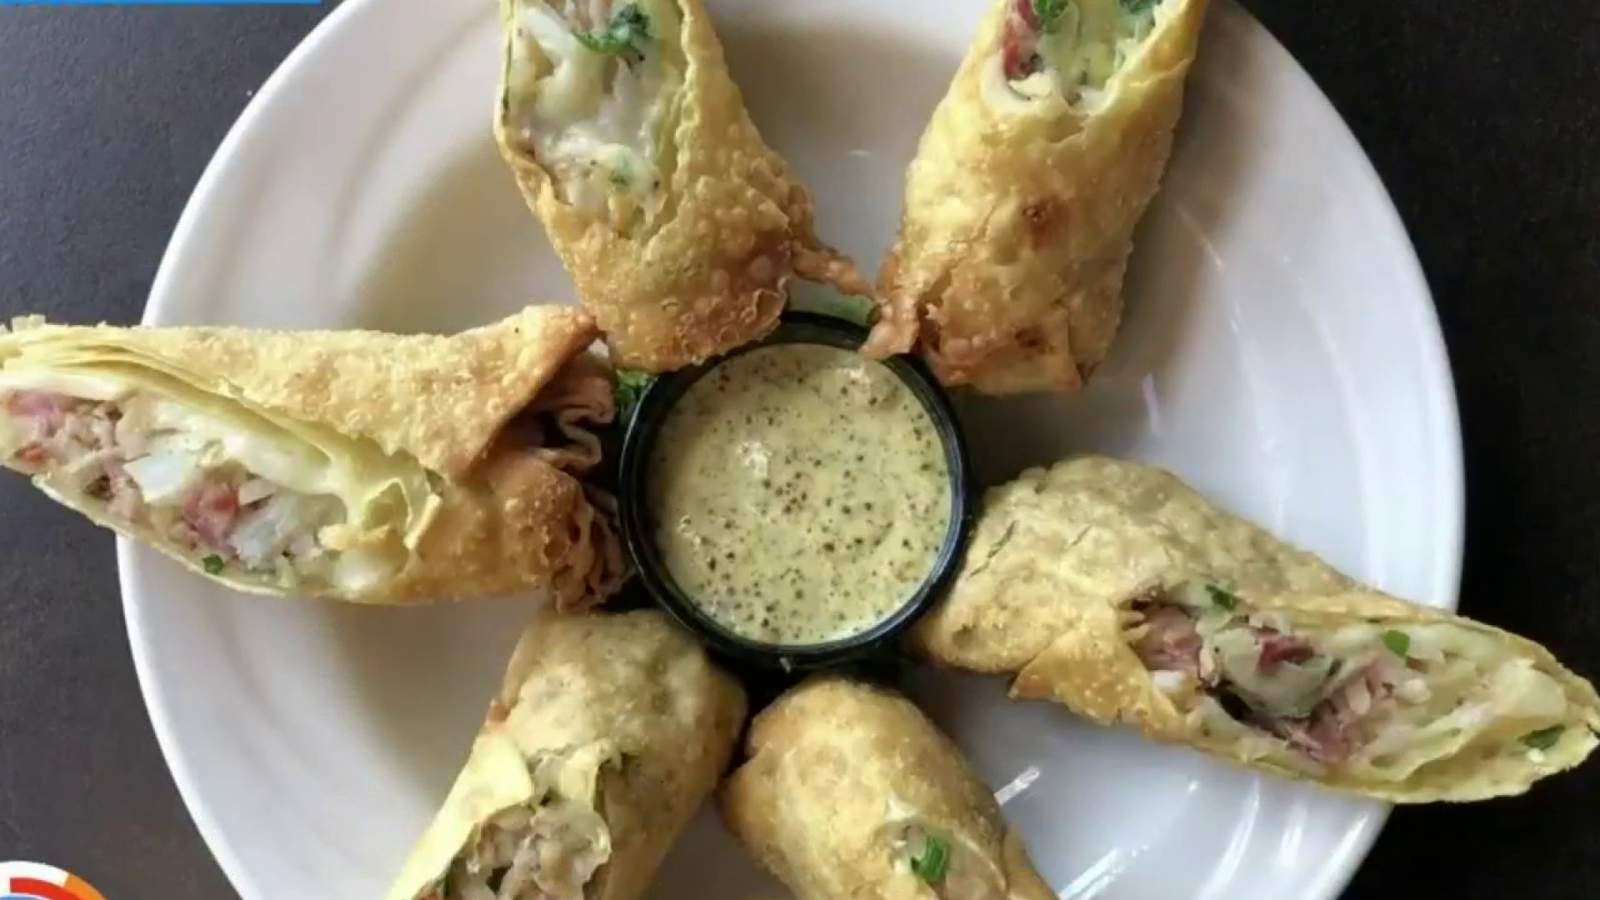 Celebrate National Egg Roll Day by trying these 5 deliciously different egg rolls!